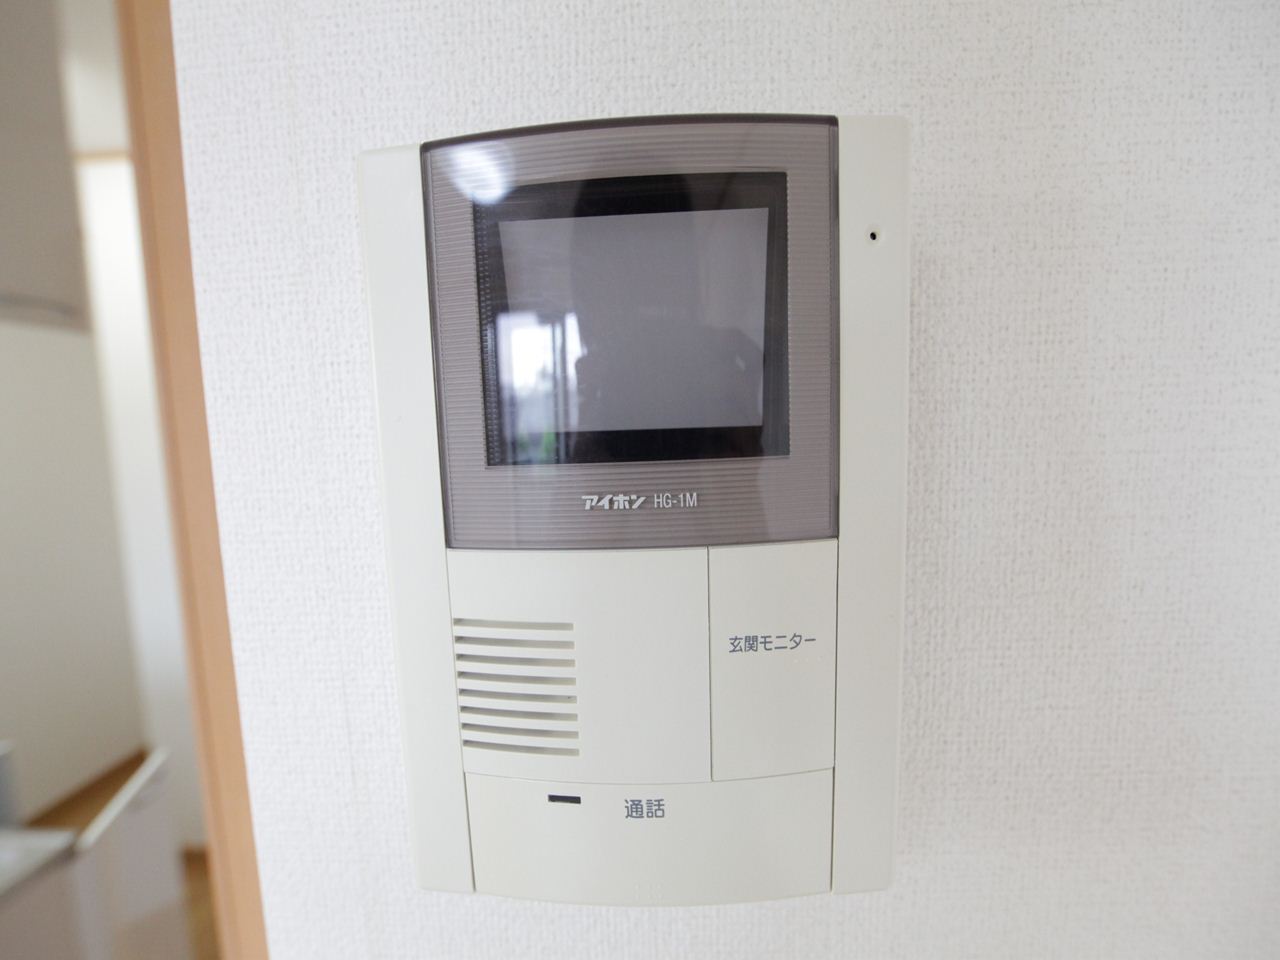 Security. TV monitor with intercom equipped